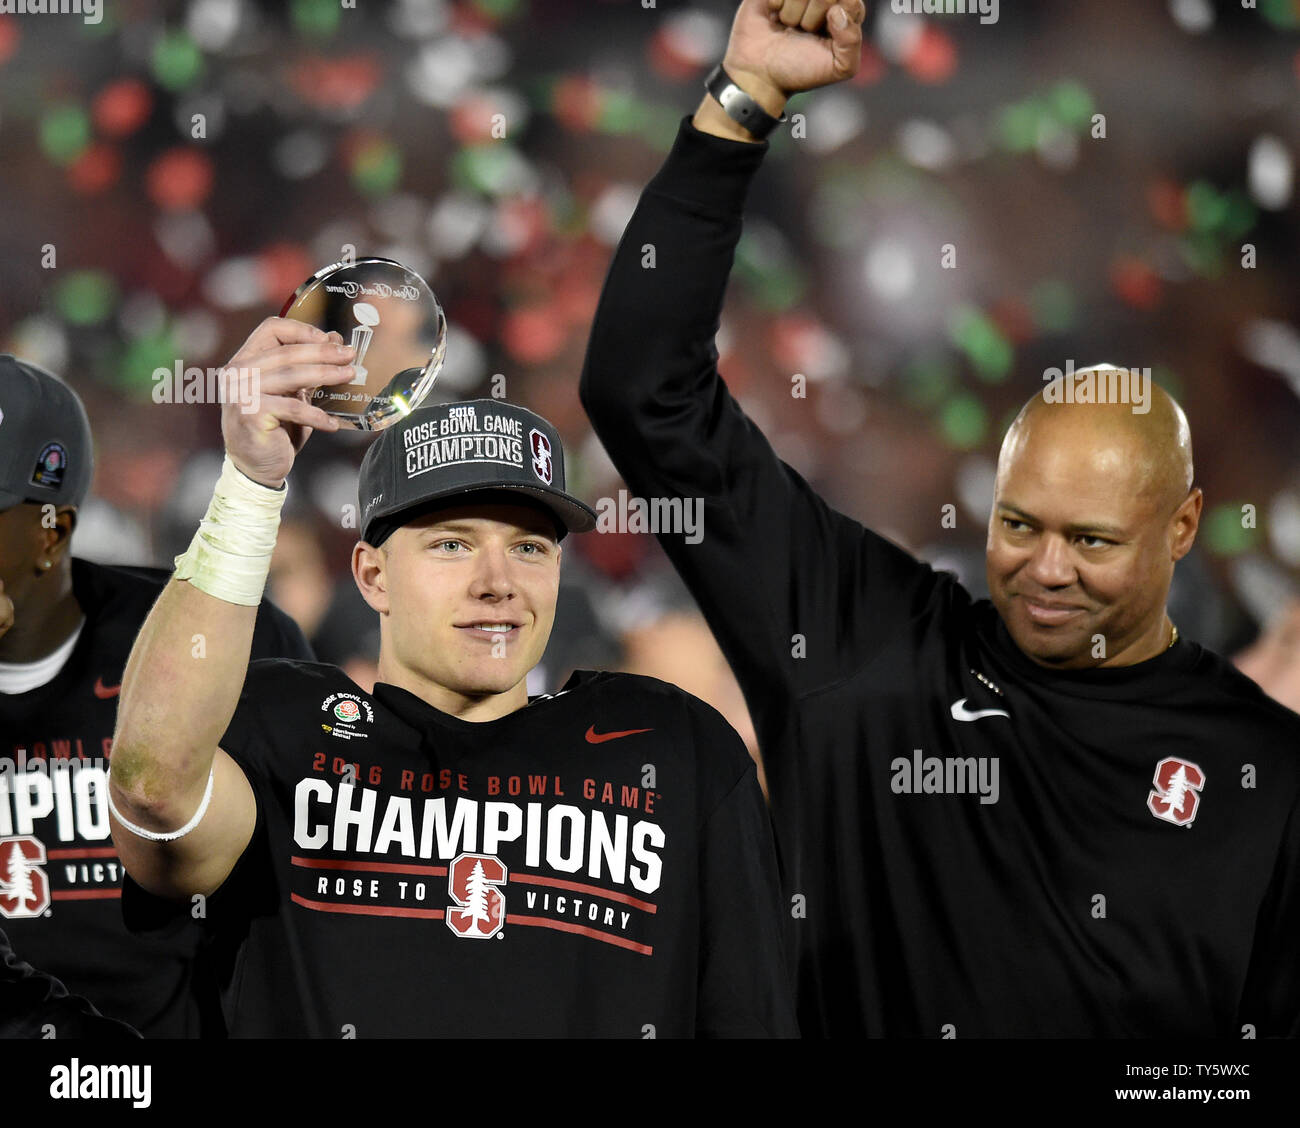 Christian McCaffrey #5 of the Stanford Cardinal holds up the Rose Bowl Game's MVP trophy as head coach David Shaw looks on. The Stanford Cardinal defeated the Iowa Hawkeyes, 45-16, in the 102nd Rose Bowl game in Pasadena, California on January 1, 2016.  Photo by Juan Ocampo/UPI Stock Photo